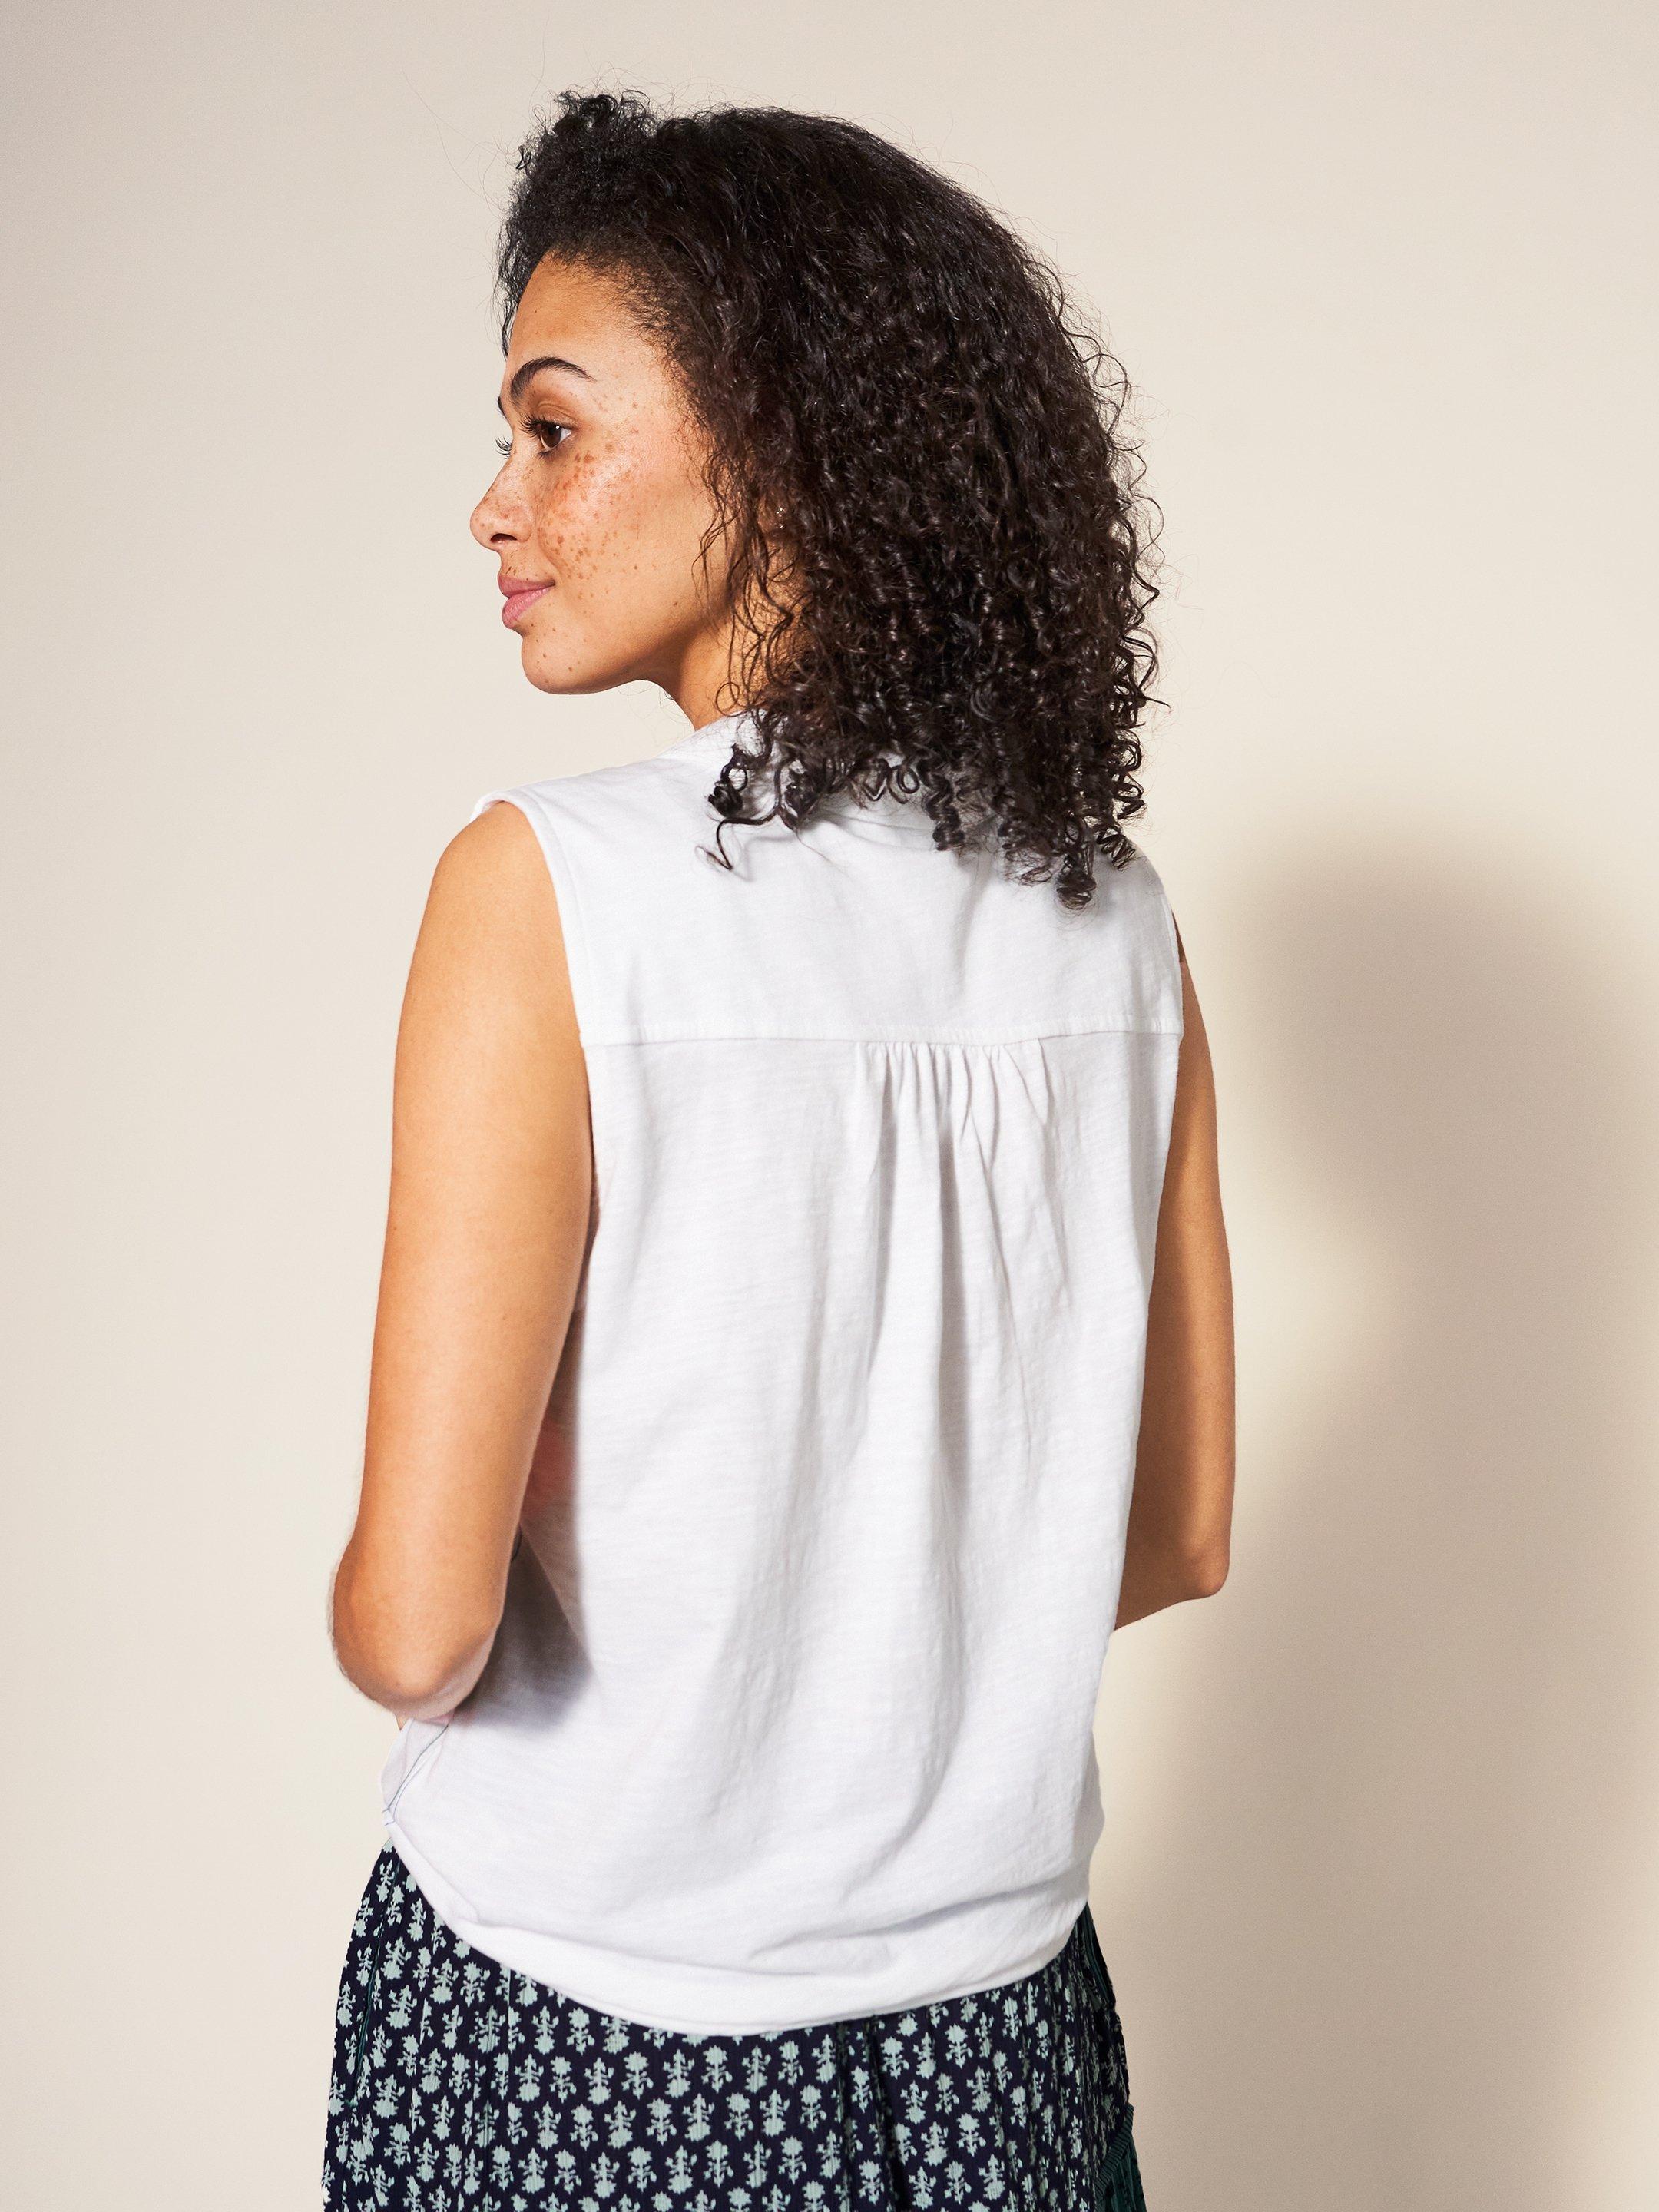 Flowing Grasses Sleeveless Jersey Shirt in BRIL WHITE - MODEL BACK